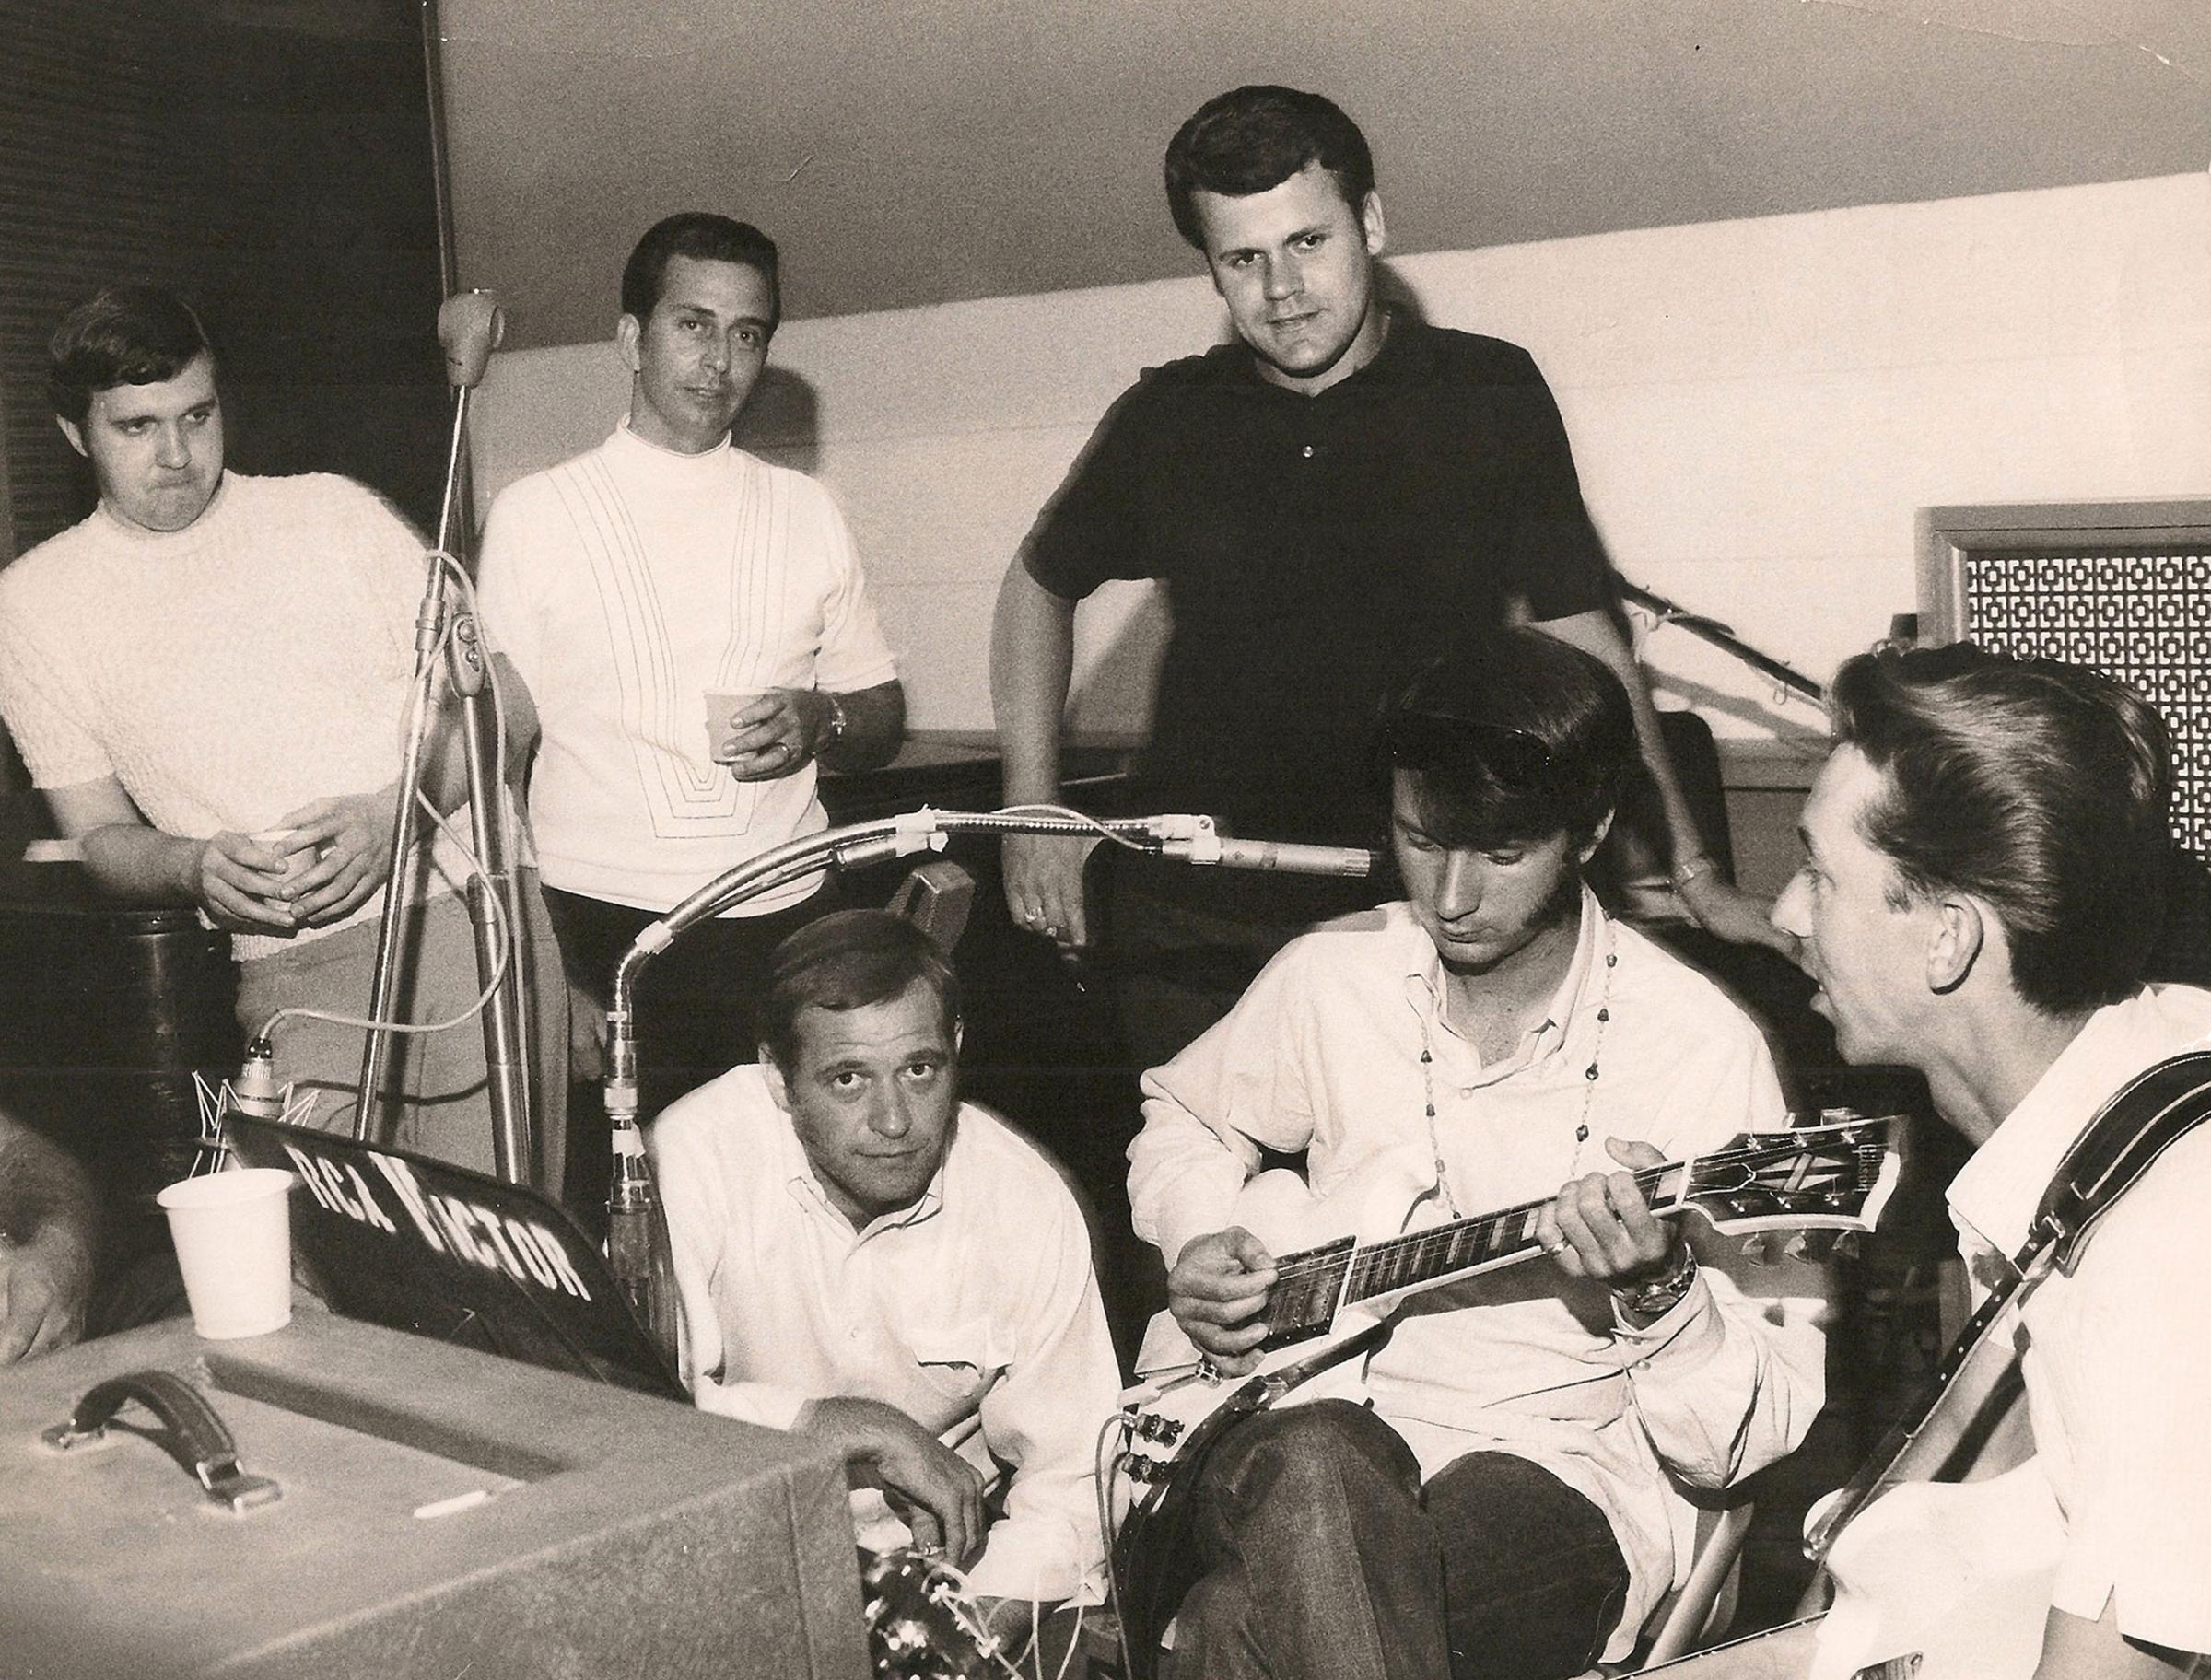 Pictured recording in RCA Studio A are (standing, l-r): Norbert Putnam, Lloyd Green, and Kenny Buttrey; (seated, l-r): Felton Jarvis, The Monkees’ Michael Nesmith, and Wayne Moss, 1960s.